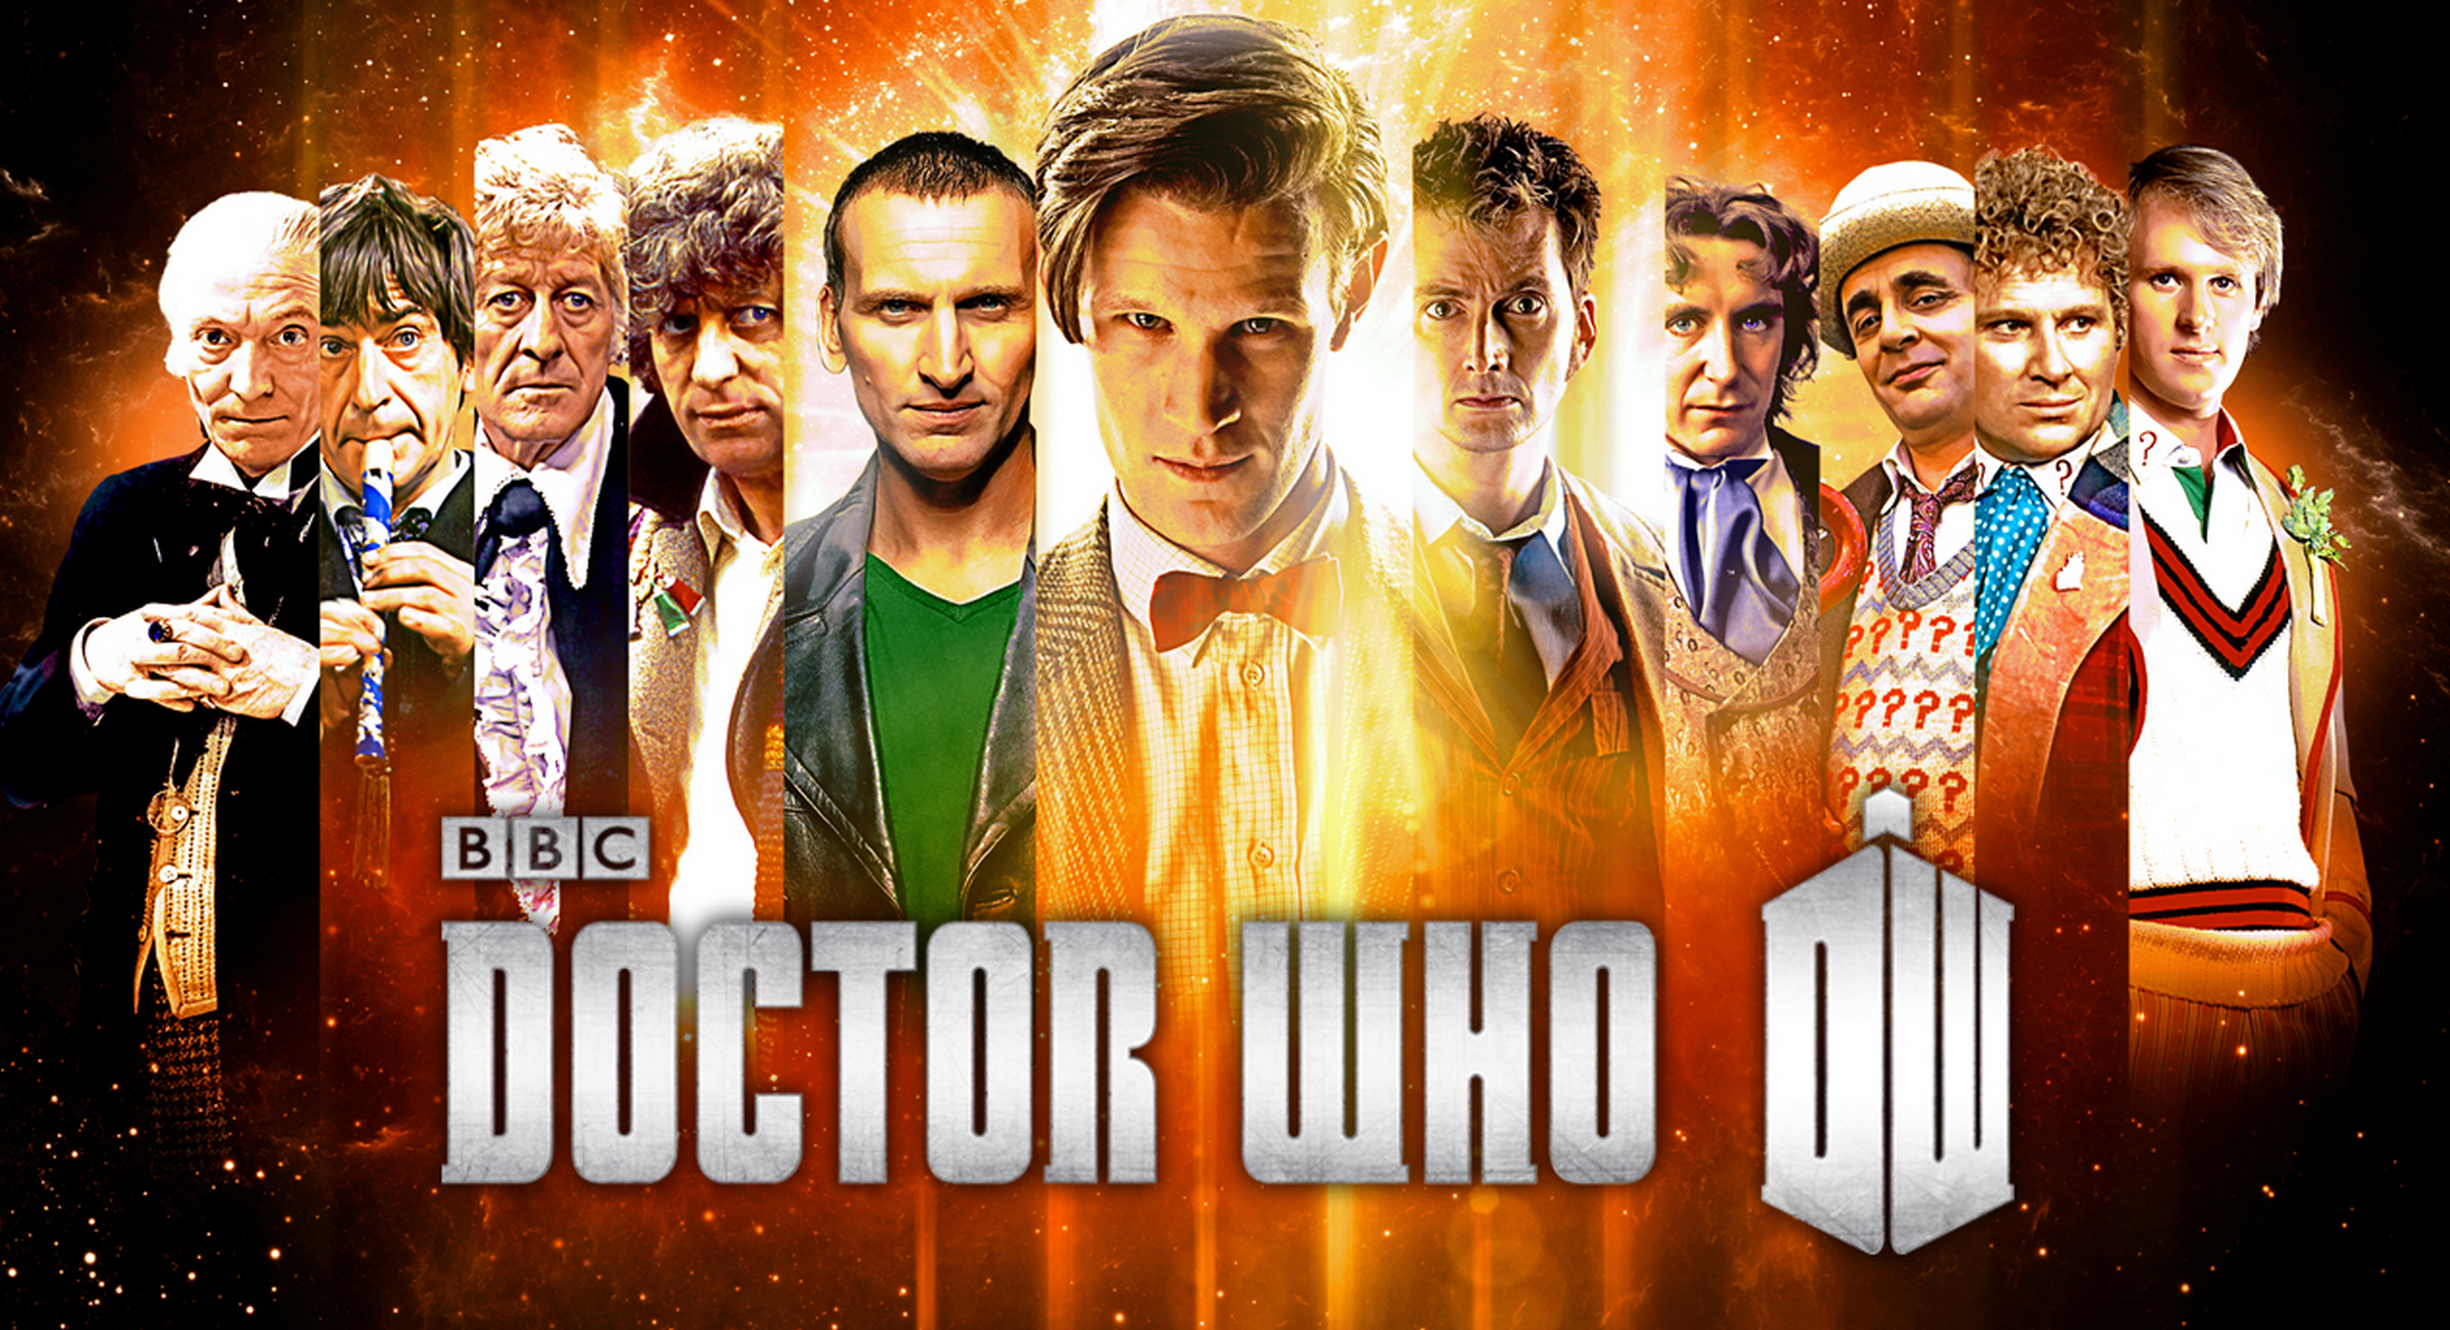 Netflix is dropping 'doctor who'